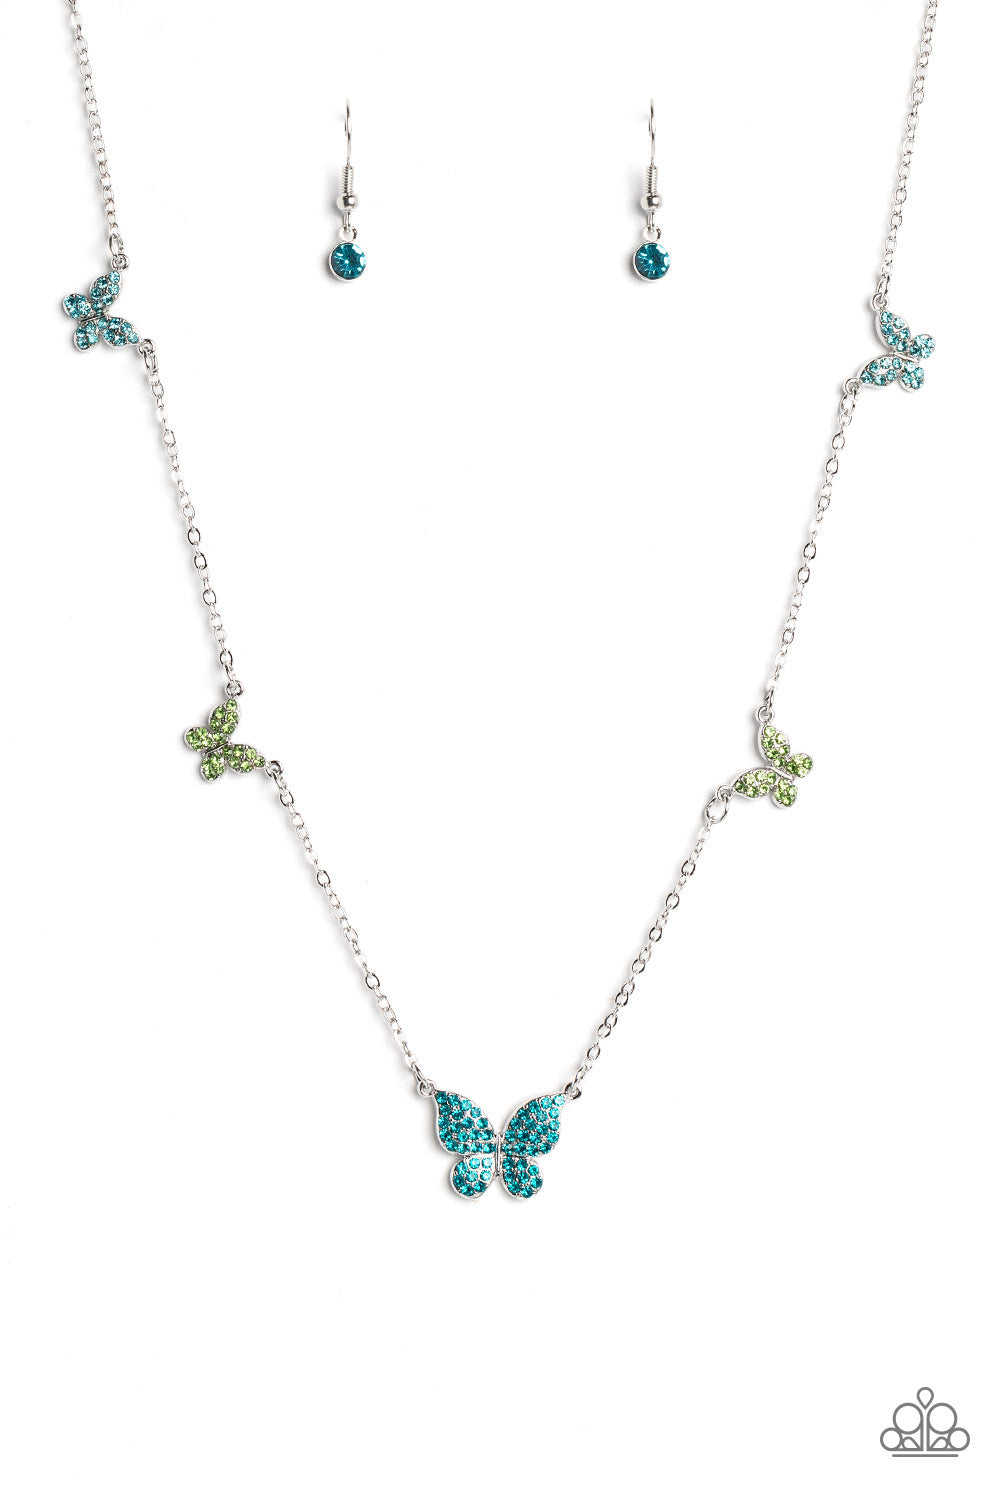 Paparazzi FAIRY Special - Blue Necklace -Paparazzi Jewelry Images 